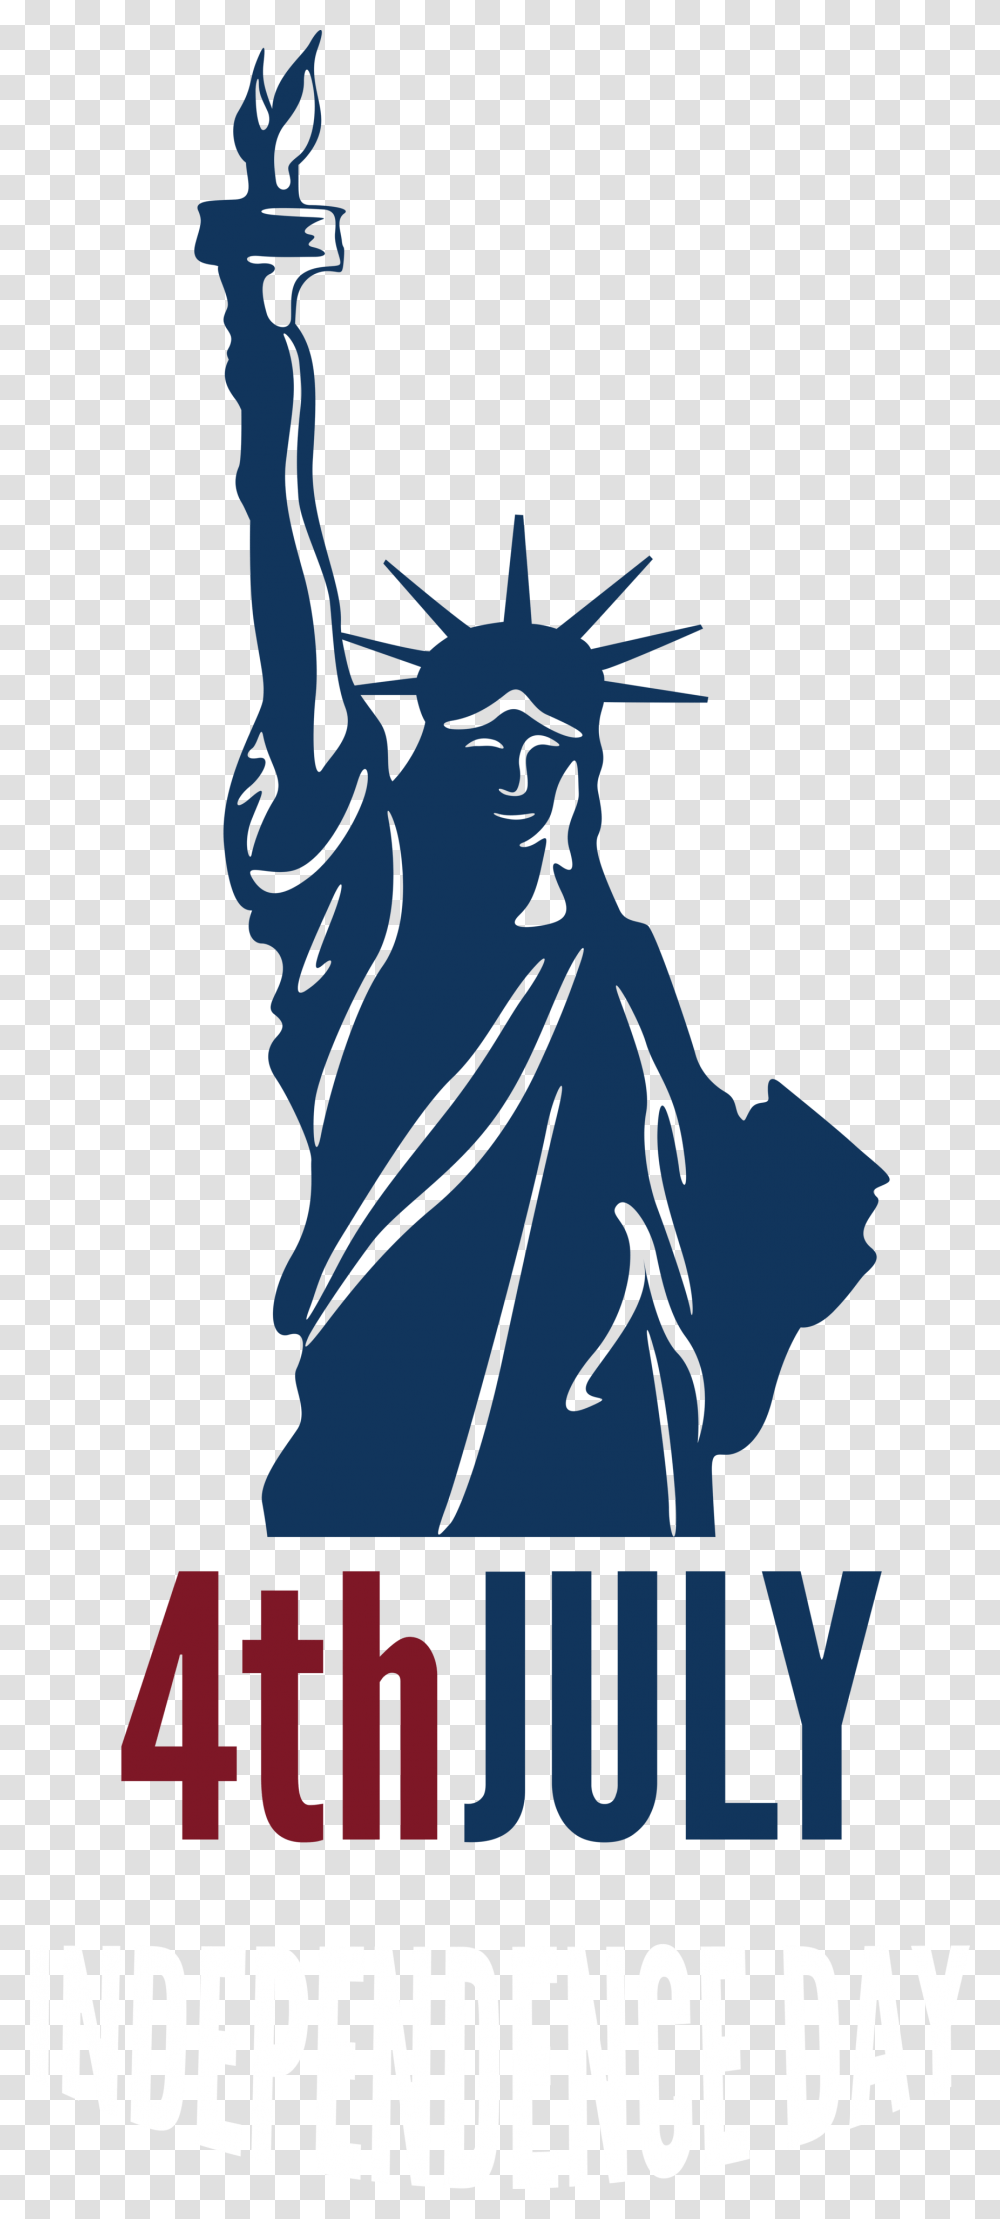 4th July Independence Day With Statue Of Liberty Statue Of Liberty Or Terrorism, Sculpture, Poster, Advertisement Transparent Png